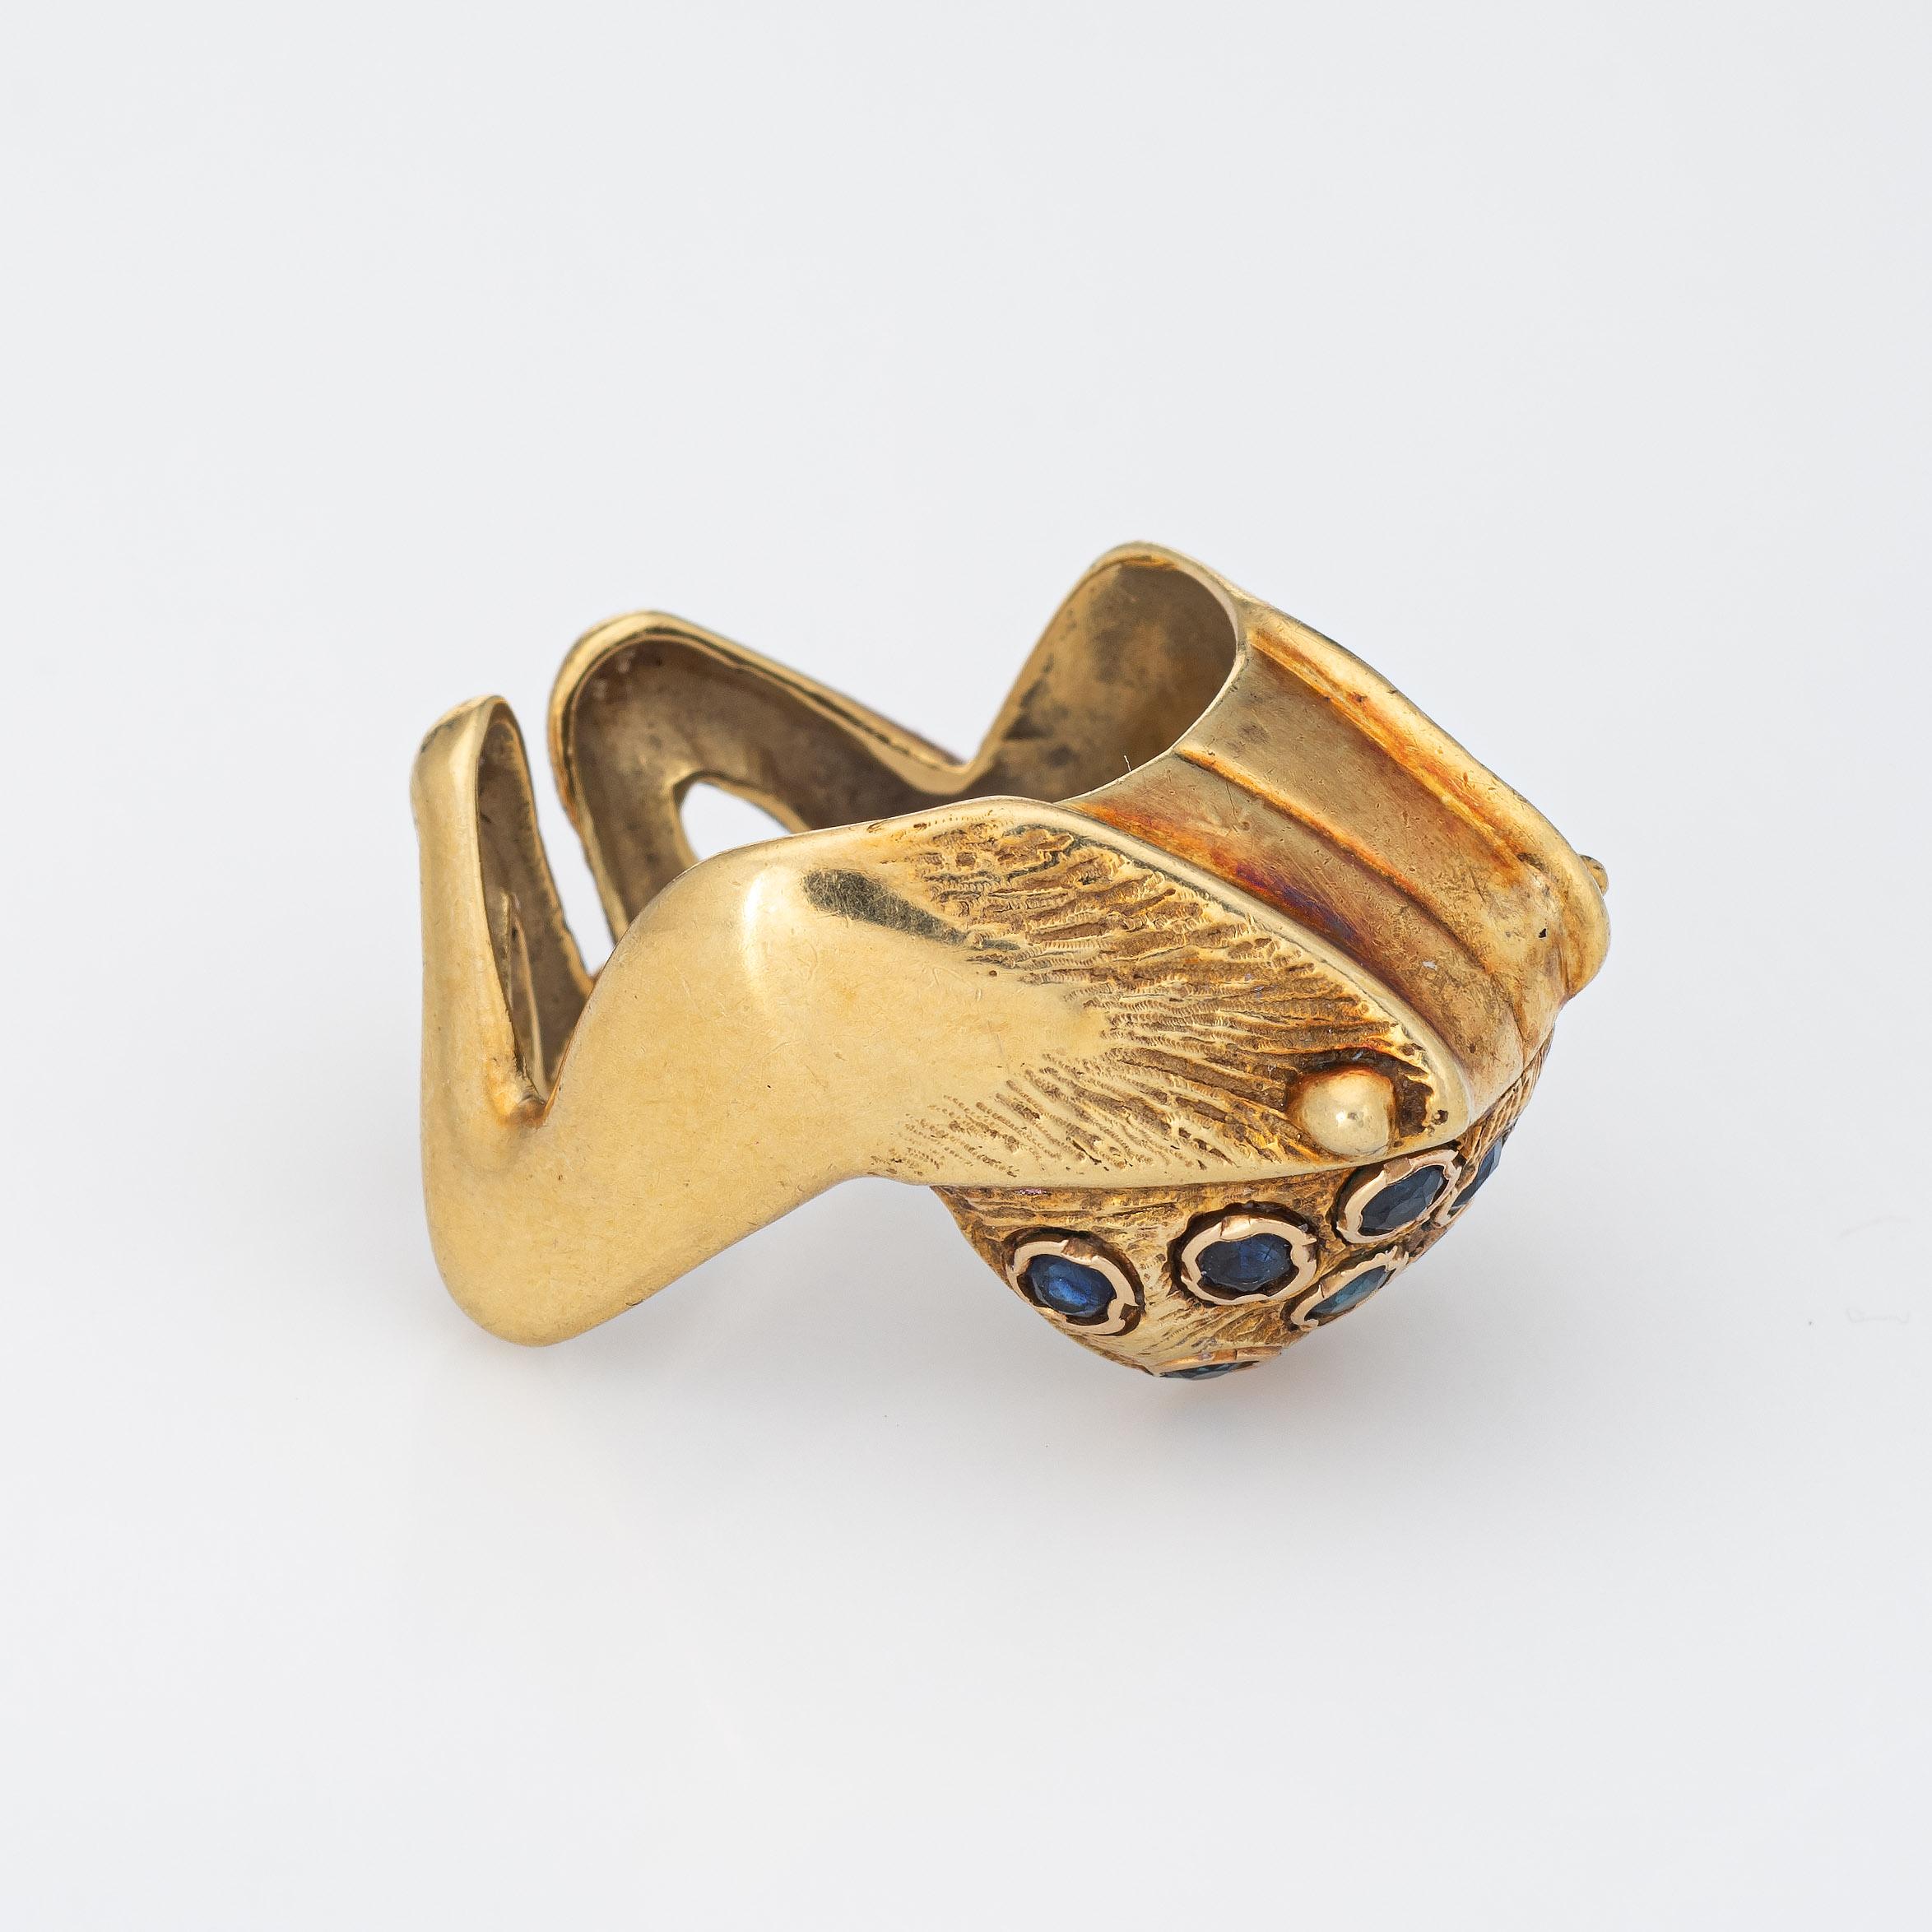 Finely detailed vintage frog ring (circa 1960s to 1970s) crafted in 18 karat yellow gold. 

13 blue sapphires are estimated at 0.05 carats each and total an estimated 0.65 carats. The sapphires are in excellent condition and free of cracks or chips.